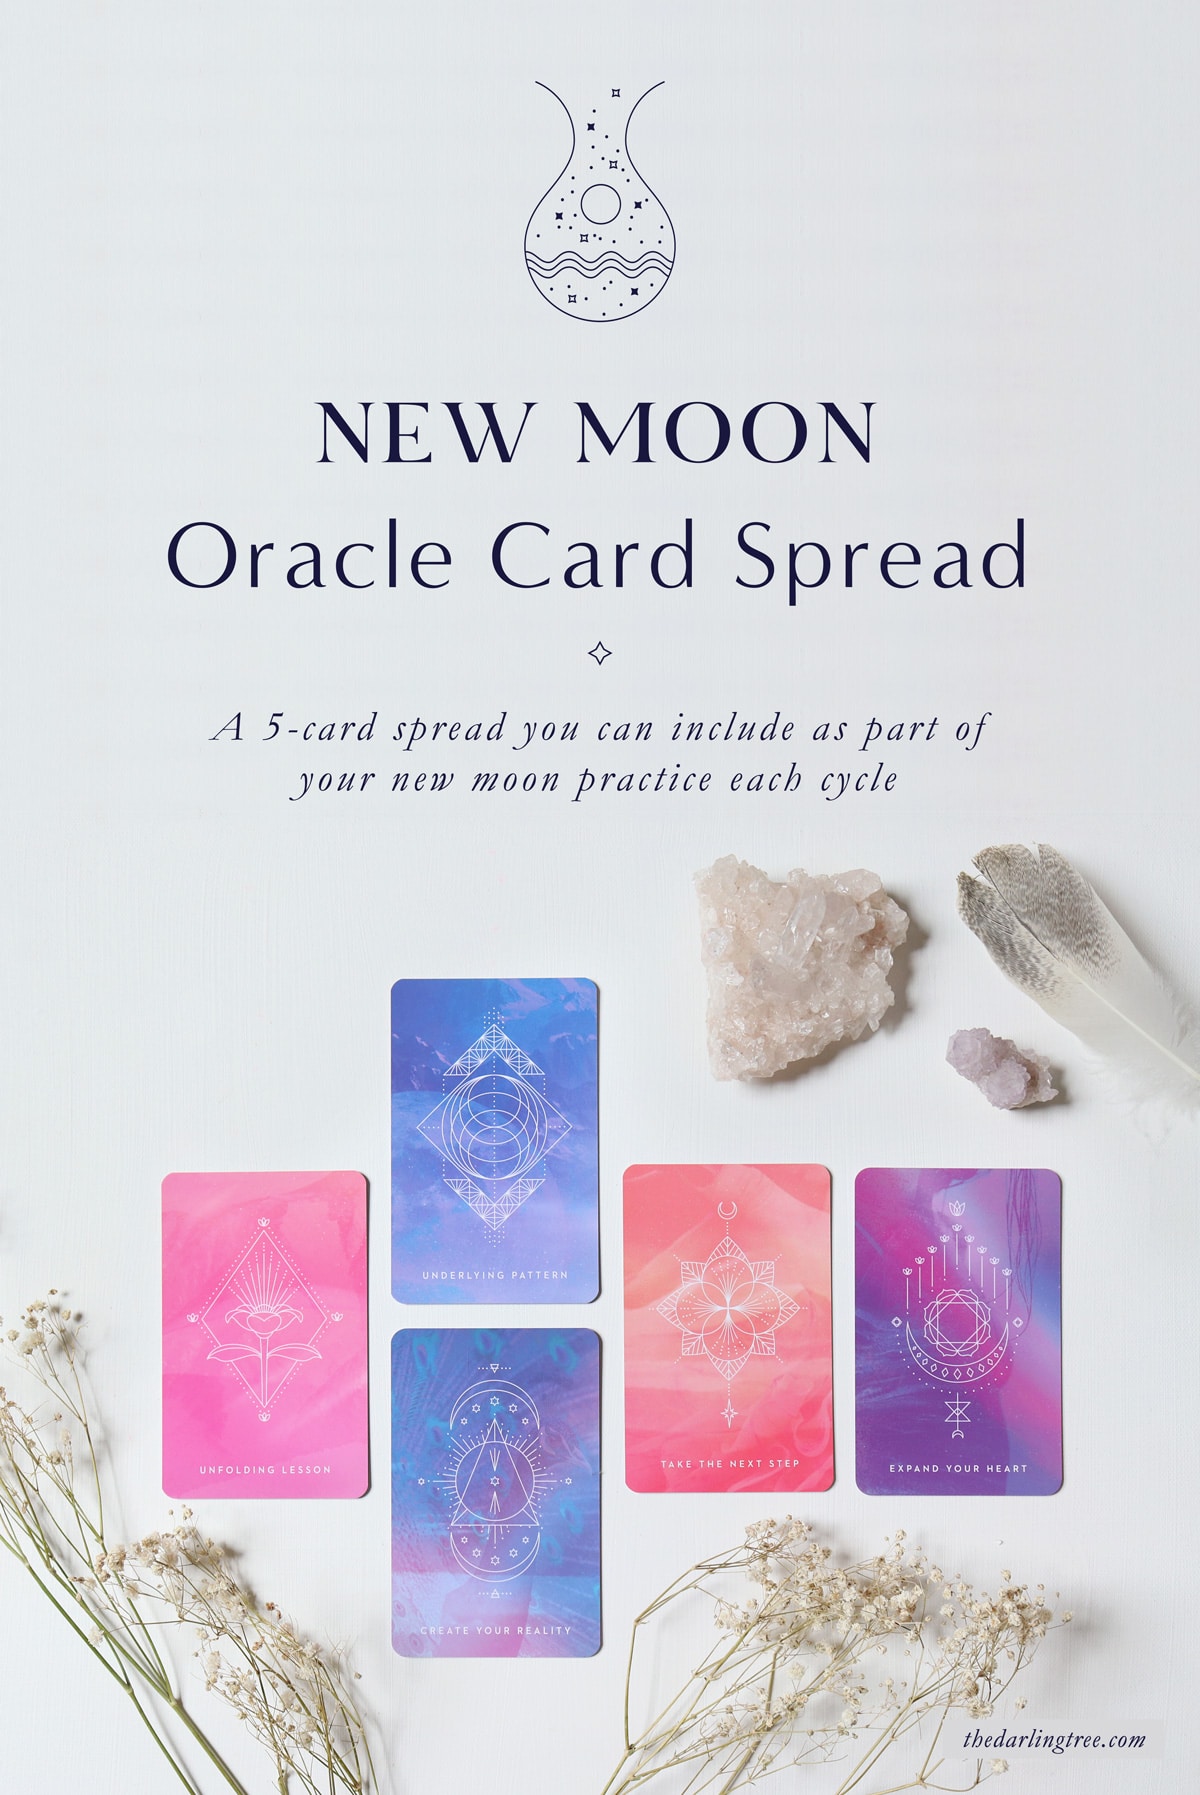 New Moon Oracle Card Spread - A 5-card spread you can include as part of your new moon practice each cycle